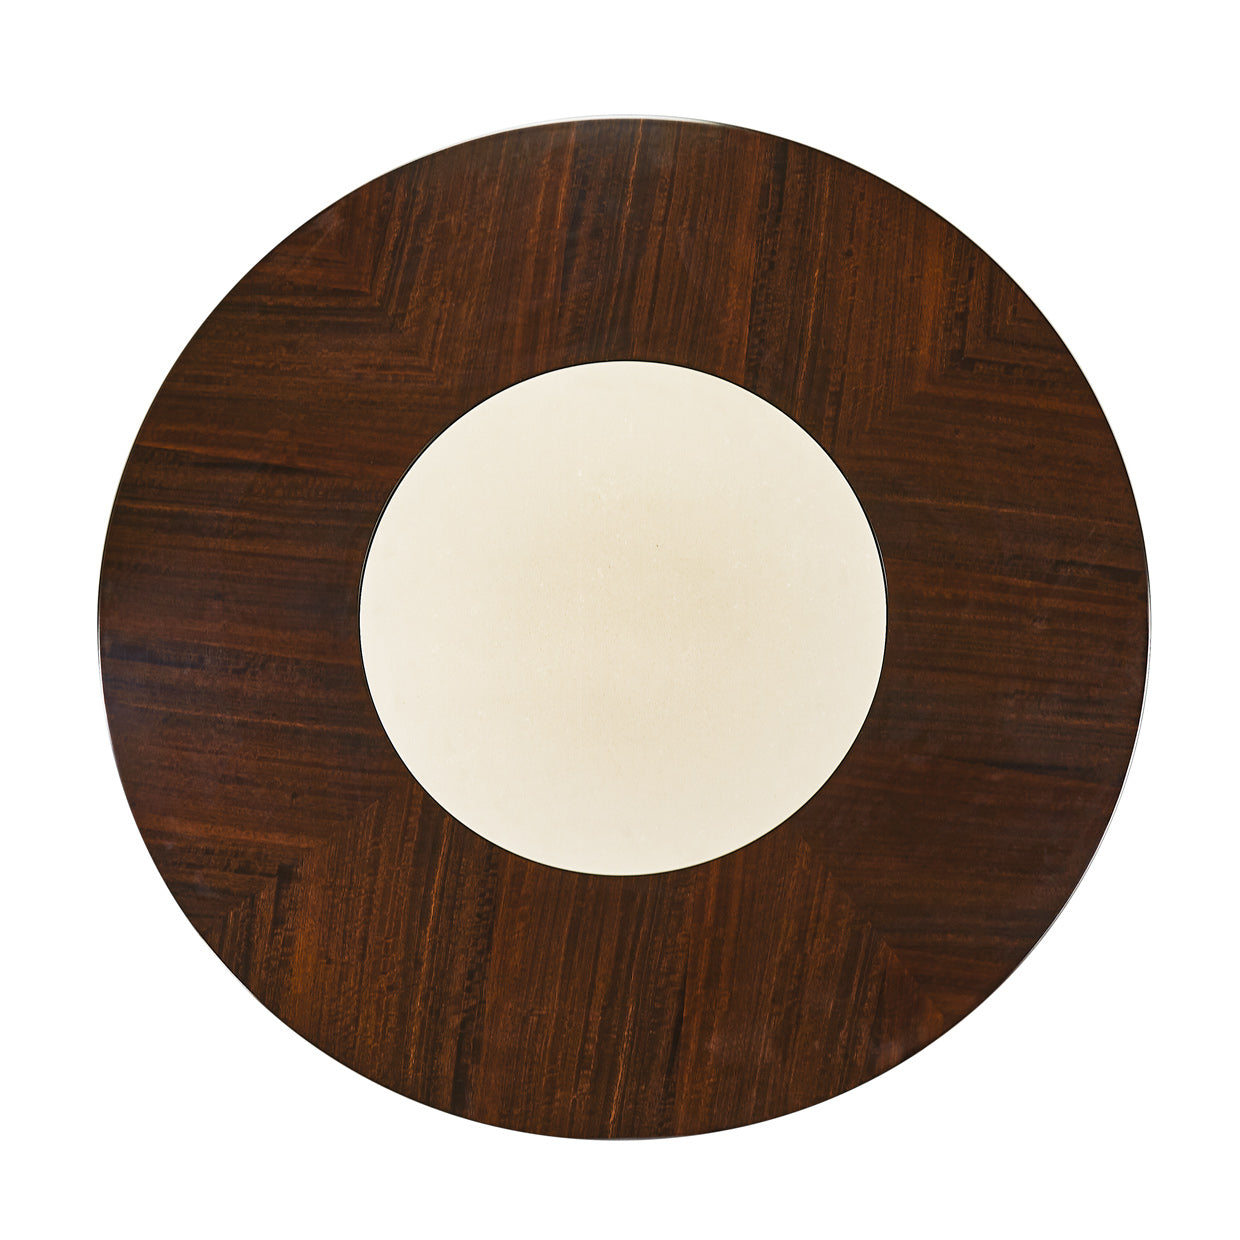 Paris Chic, Round Dining Table, 48-inch, Dining Table Set, Timeless elegance, Sophisticated design, Modern dining room, Espresso-finished hardwood, Figured, eucalyptus veneer, Luxury and style, Ample space, Intimate gatherings, Family meals, Dining ensemble, Home décor, dream art , Michael amini